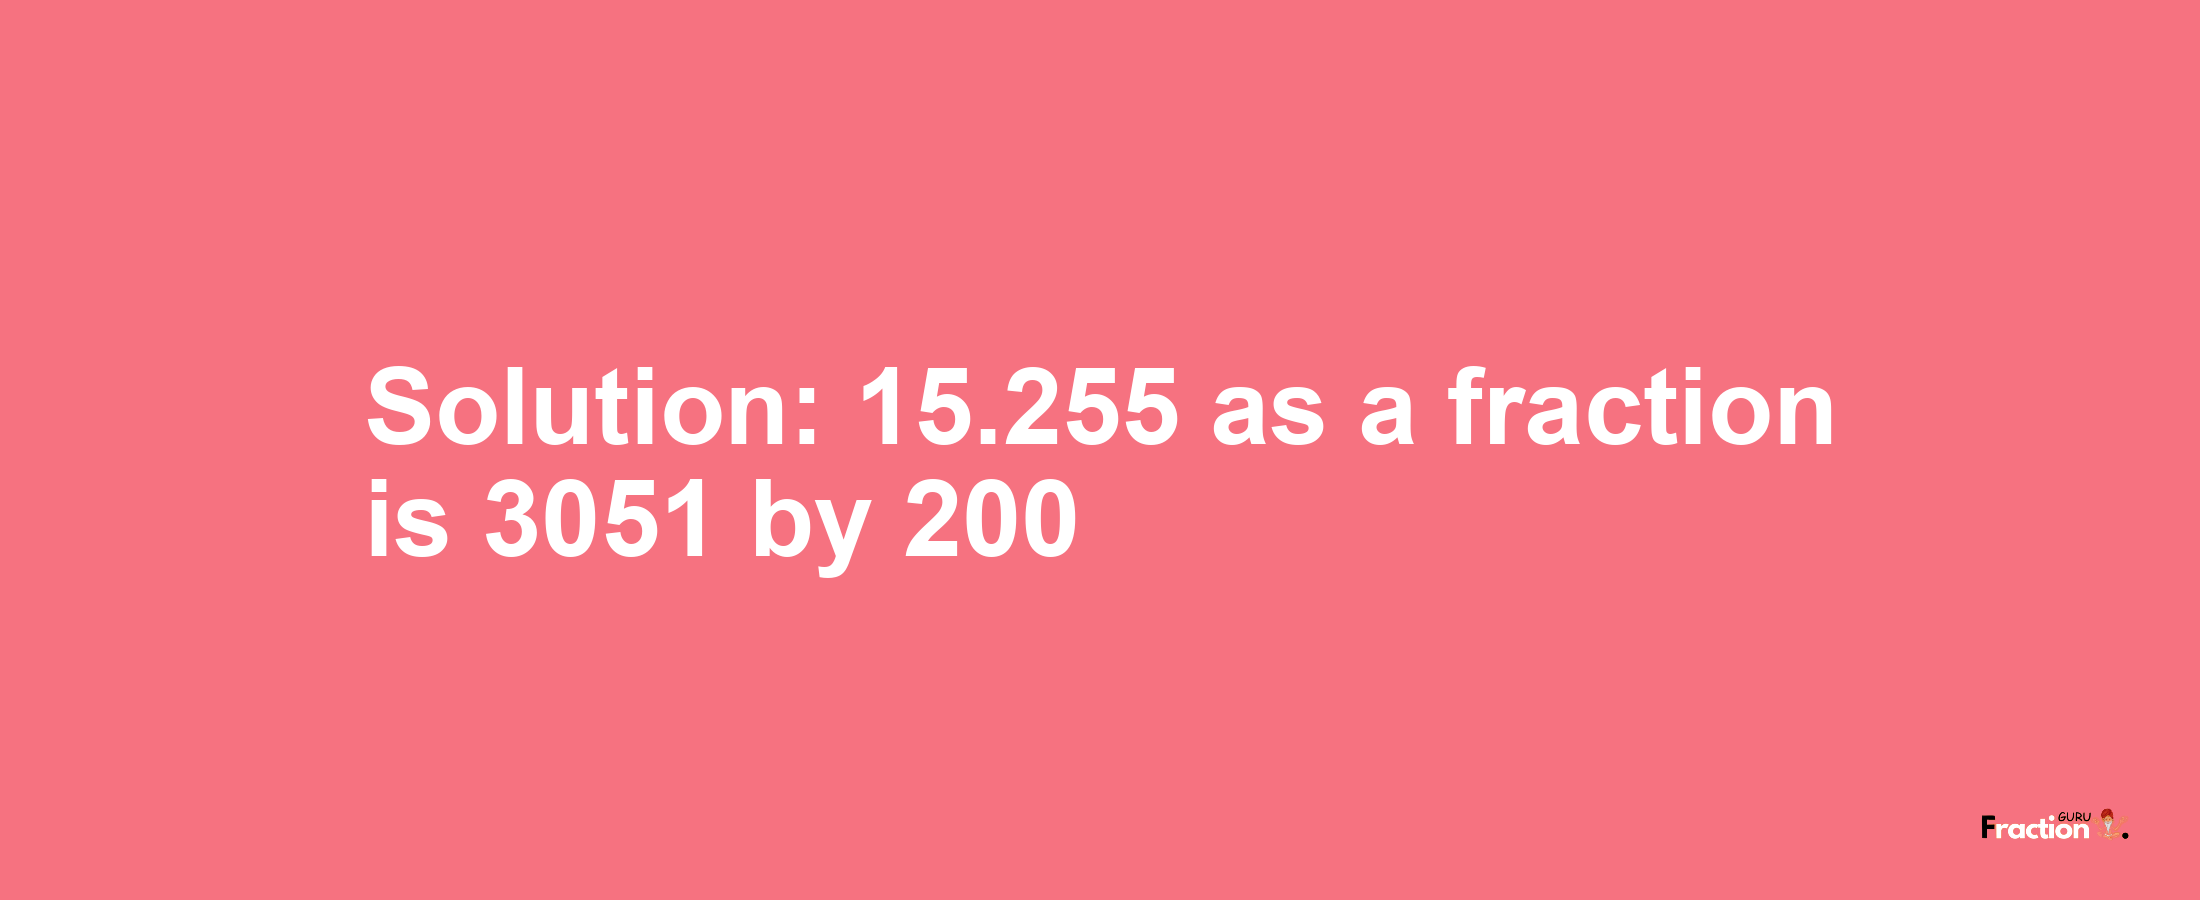 Solution:15.255 as a fraction is 3051/200